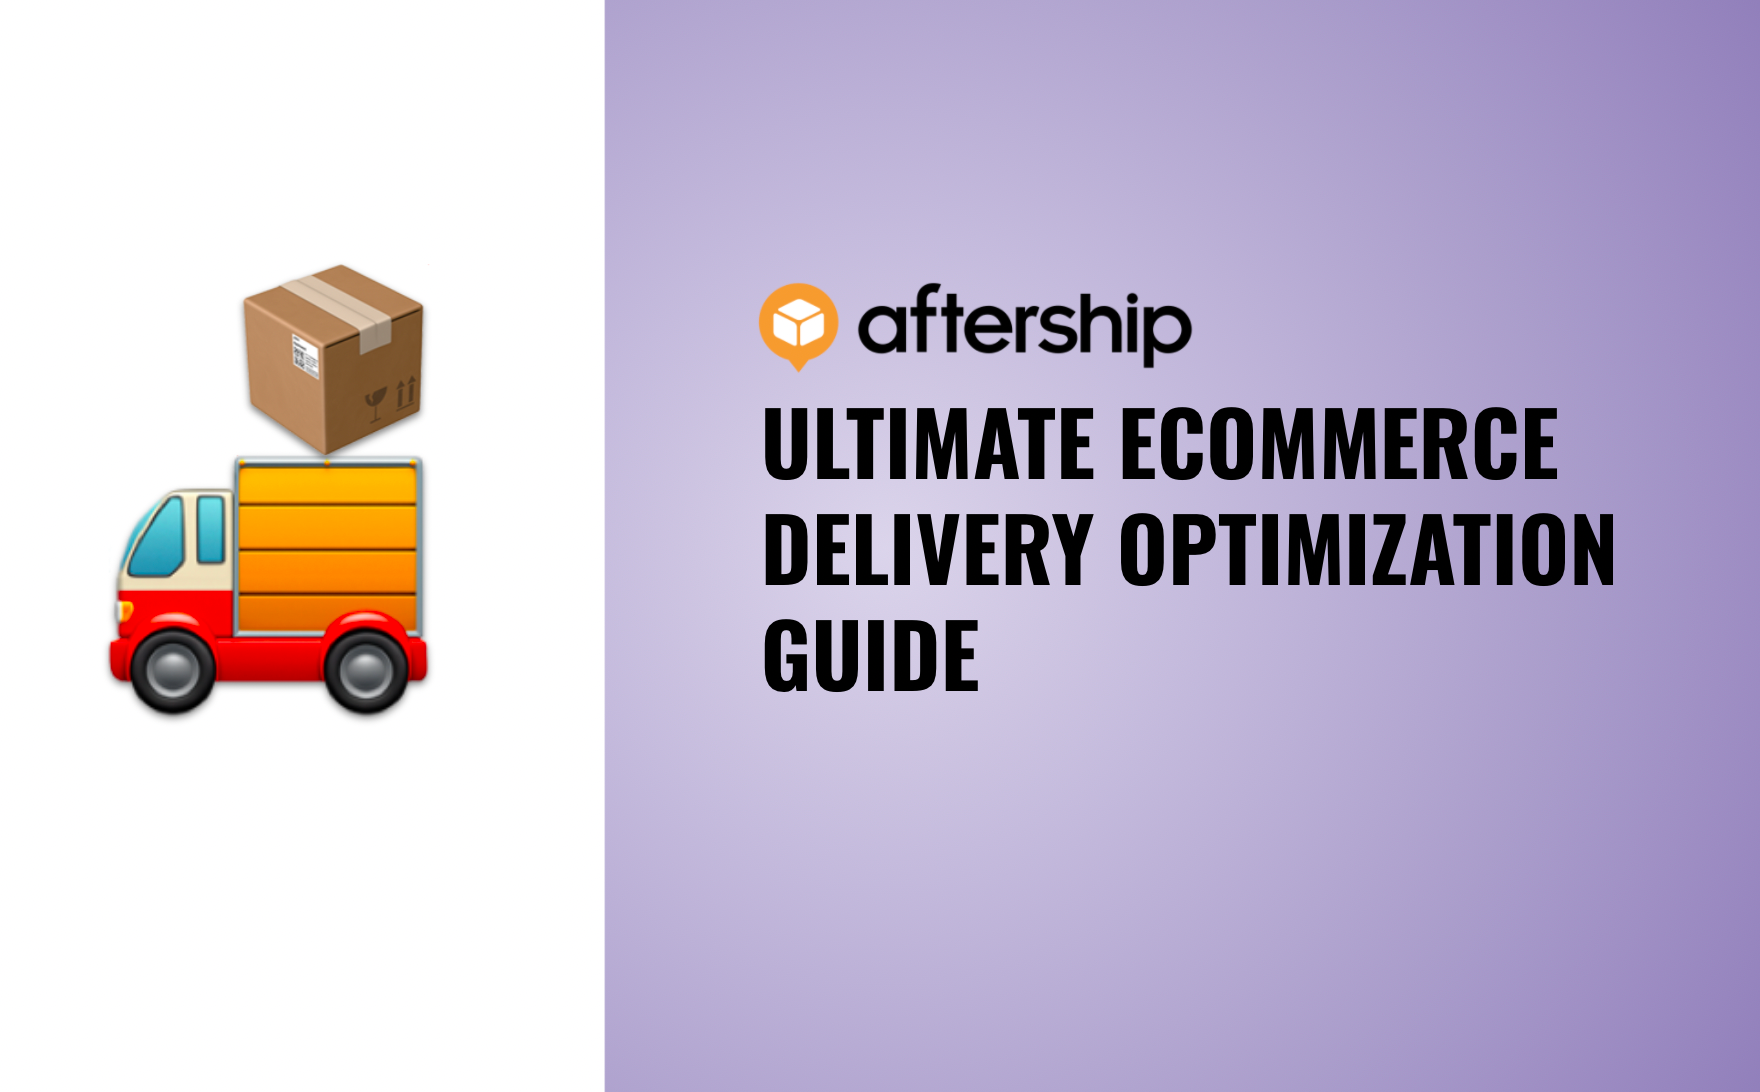 The Ultimate Guide for Optimizing eCommerce Delivery in 2022